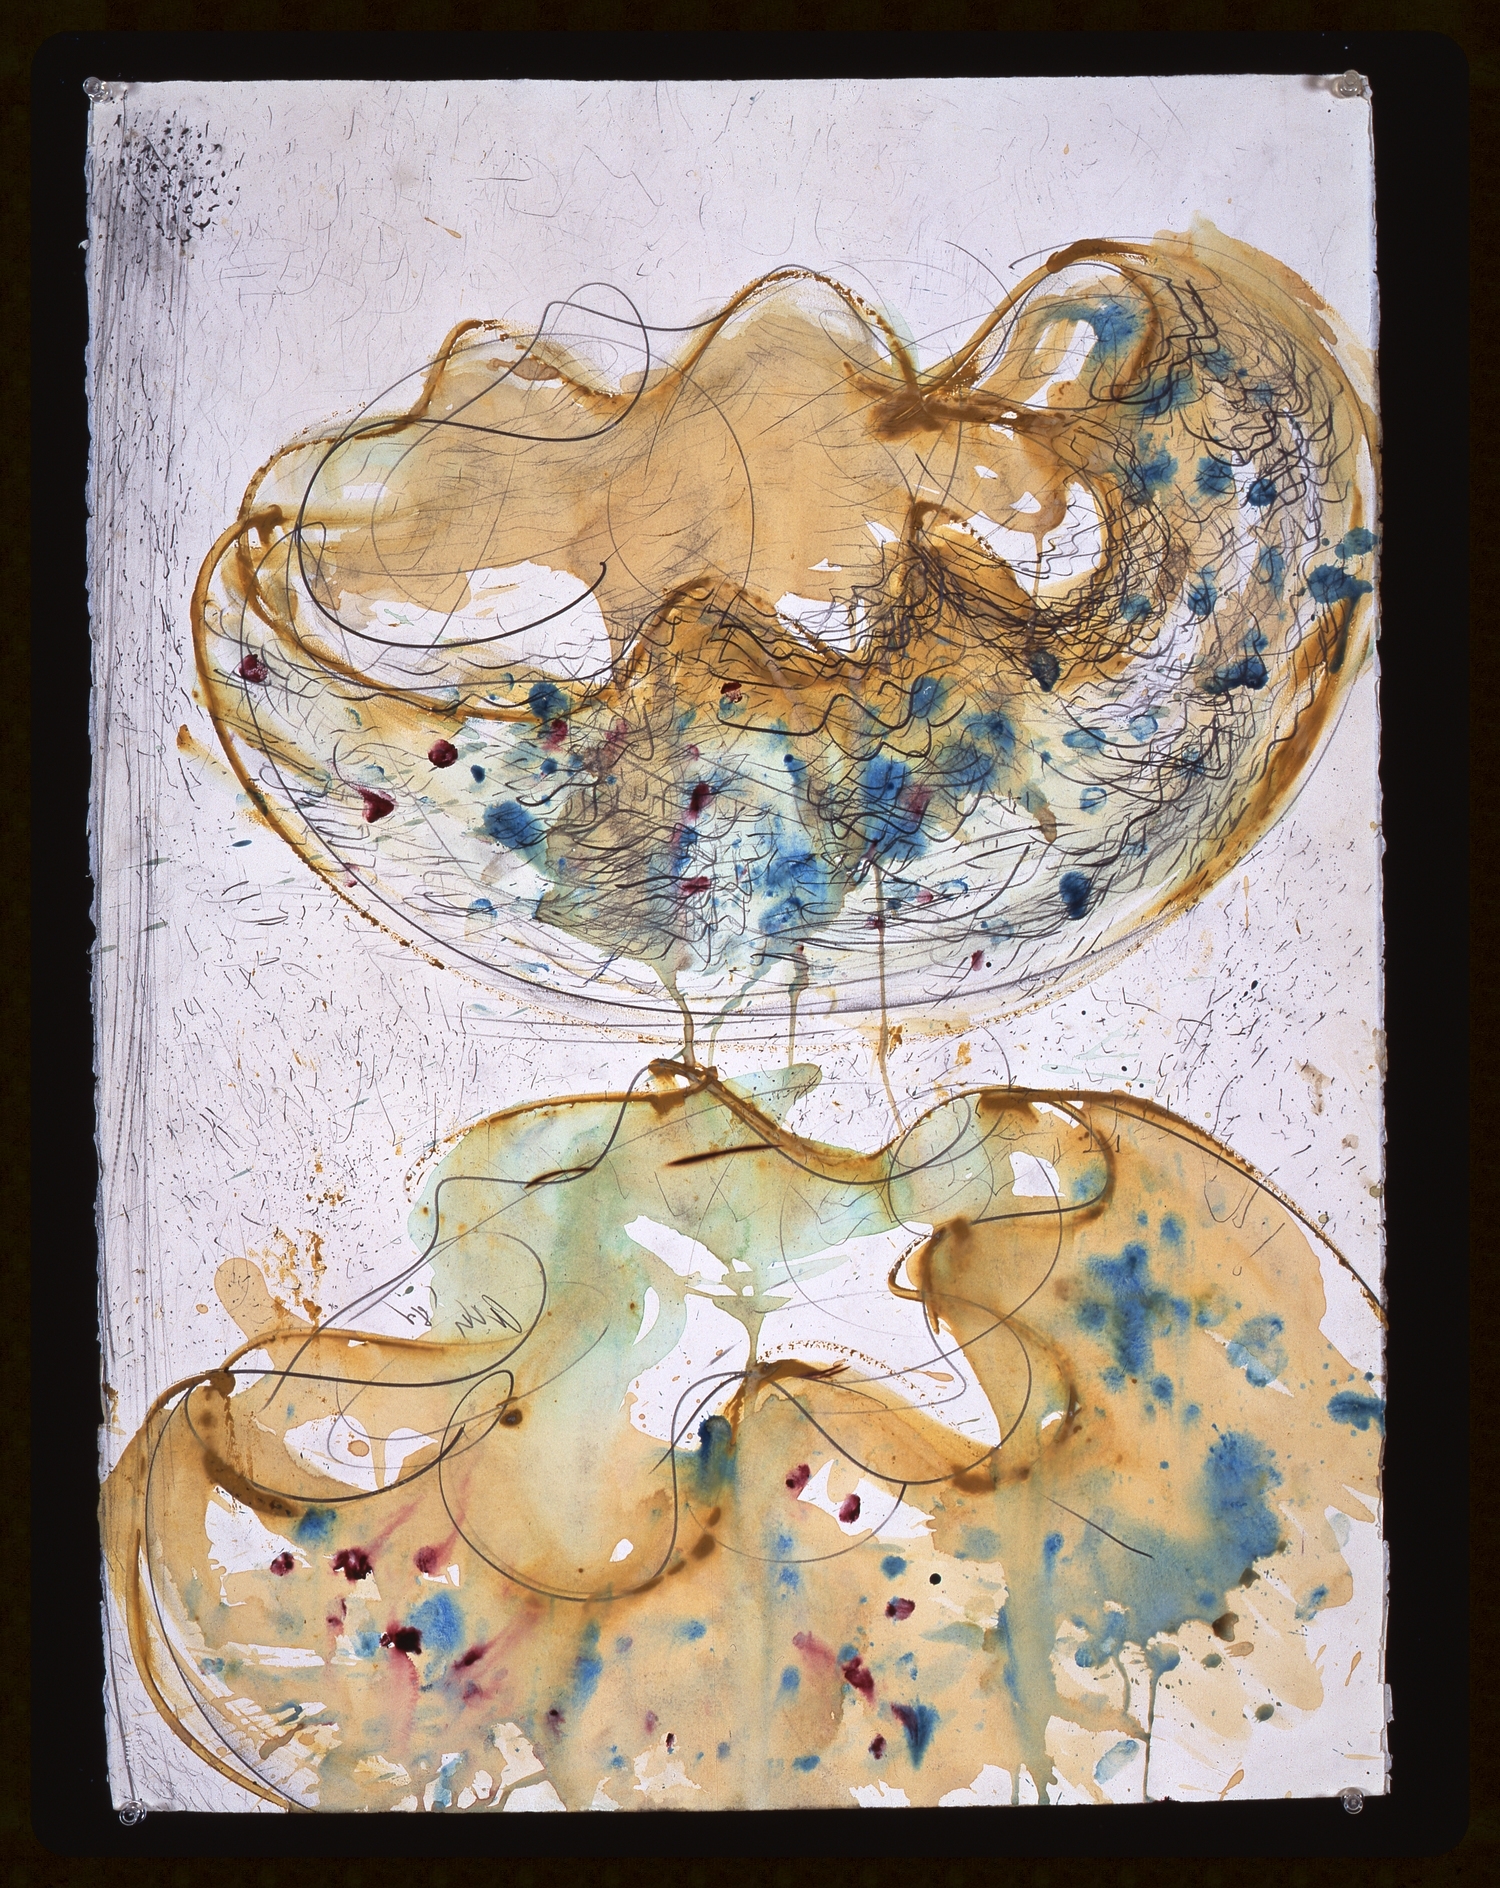  Dale Chihuly,&nbsp; Macchia Drawing #14,  (1982, charcoal, watercolor and graphite on paper, 30 x 22 inches), DC.83 